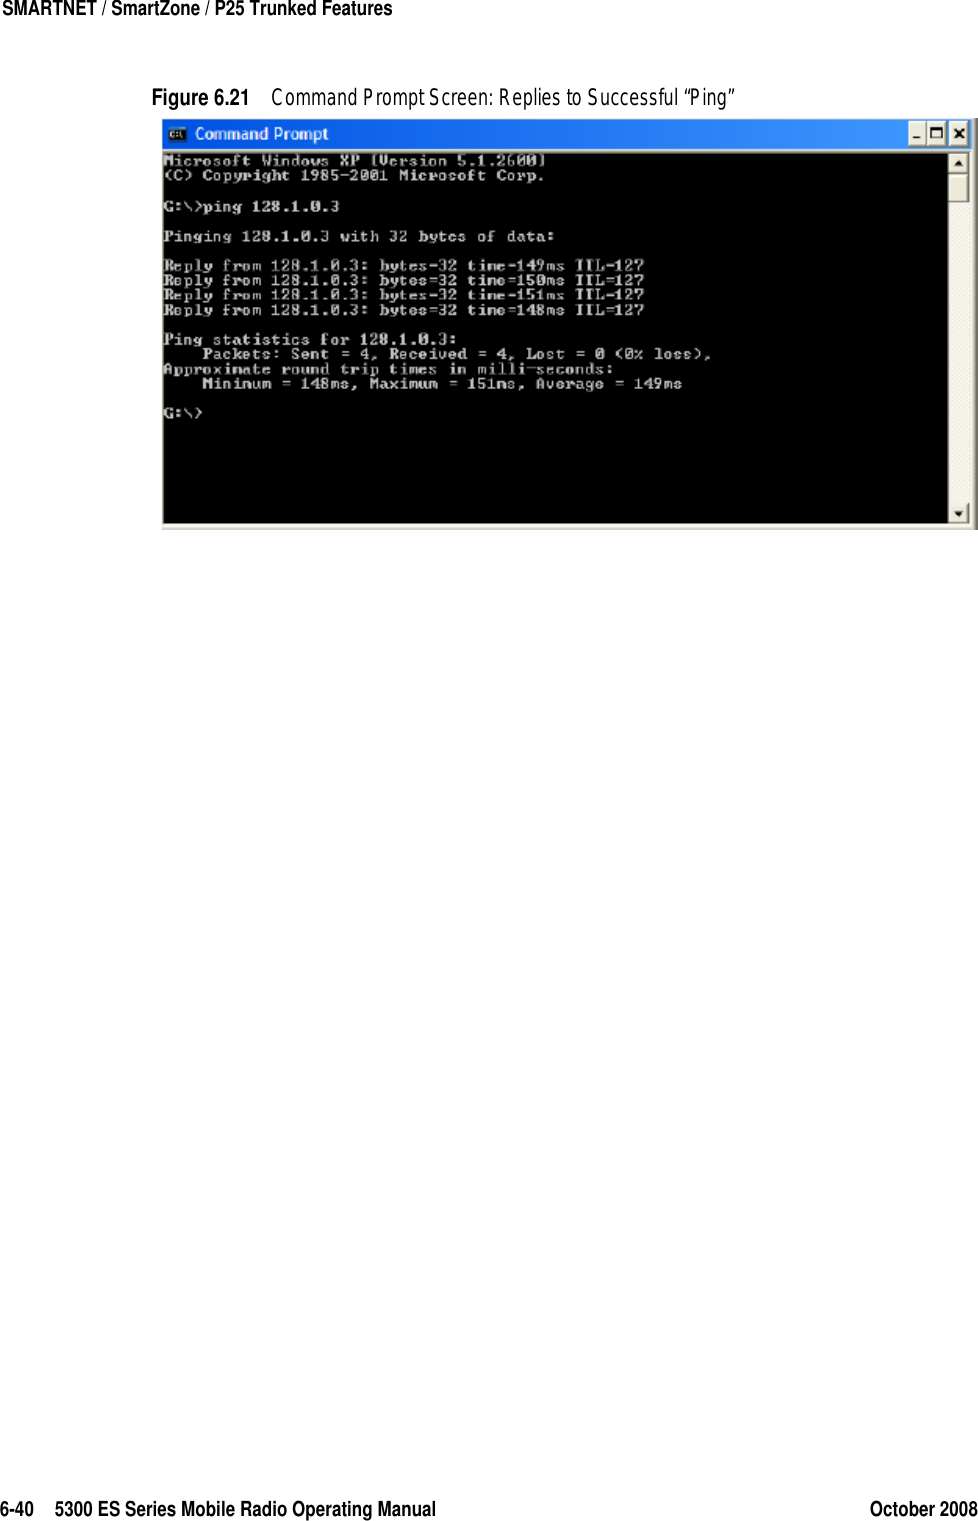 6-40 5300 ES Series Mobile Radio Operating Manual October 2008SMARTNET / SmartZone / P25 Trunked FeaturesFigure 6.21 Command Prompt Screen: Replies to Successful “Ping”